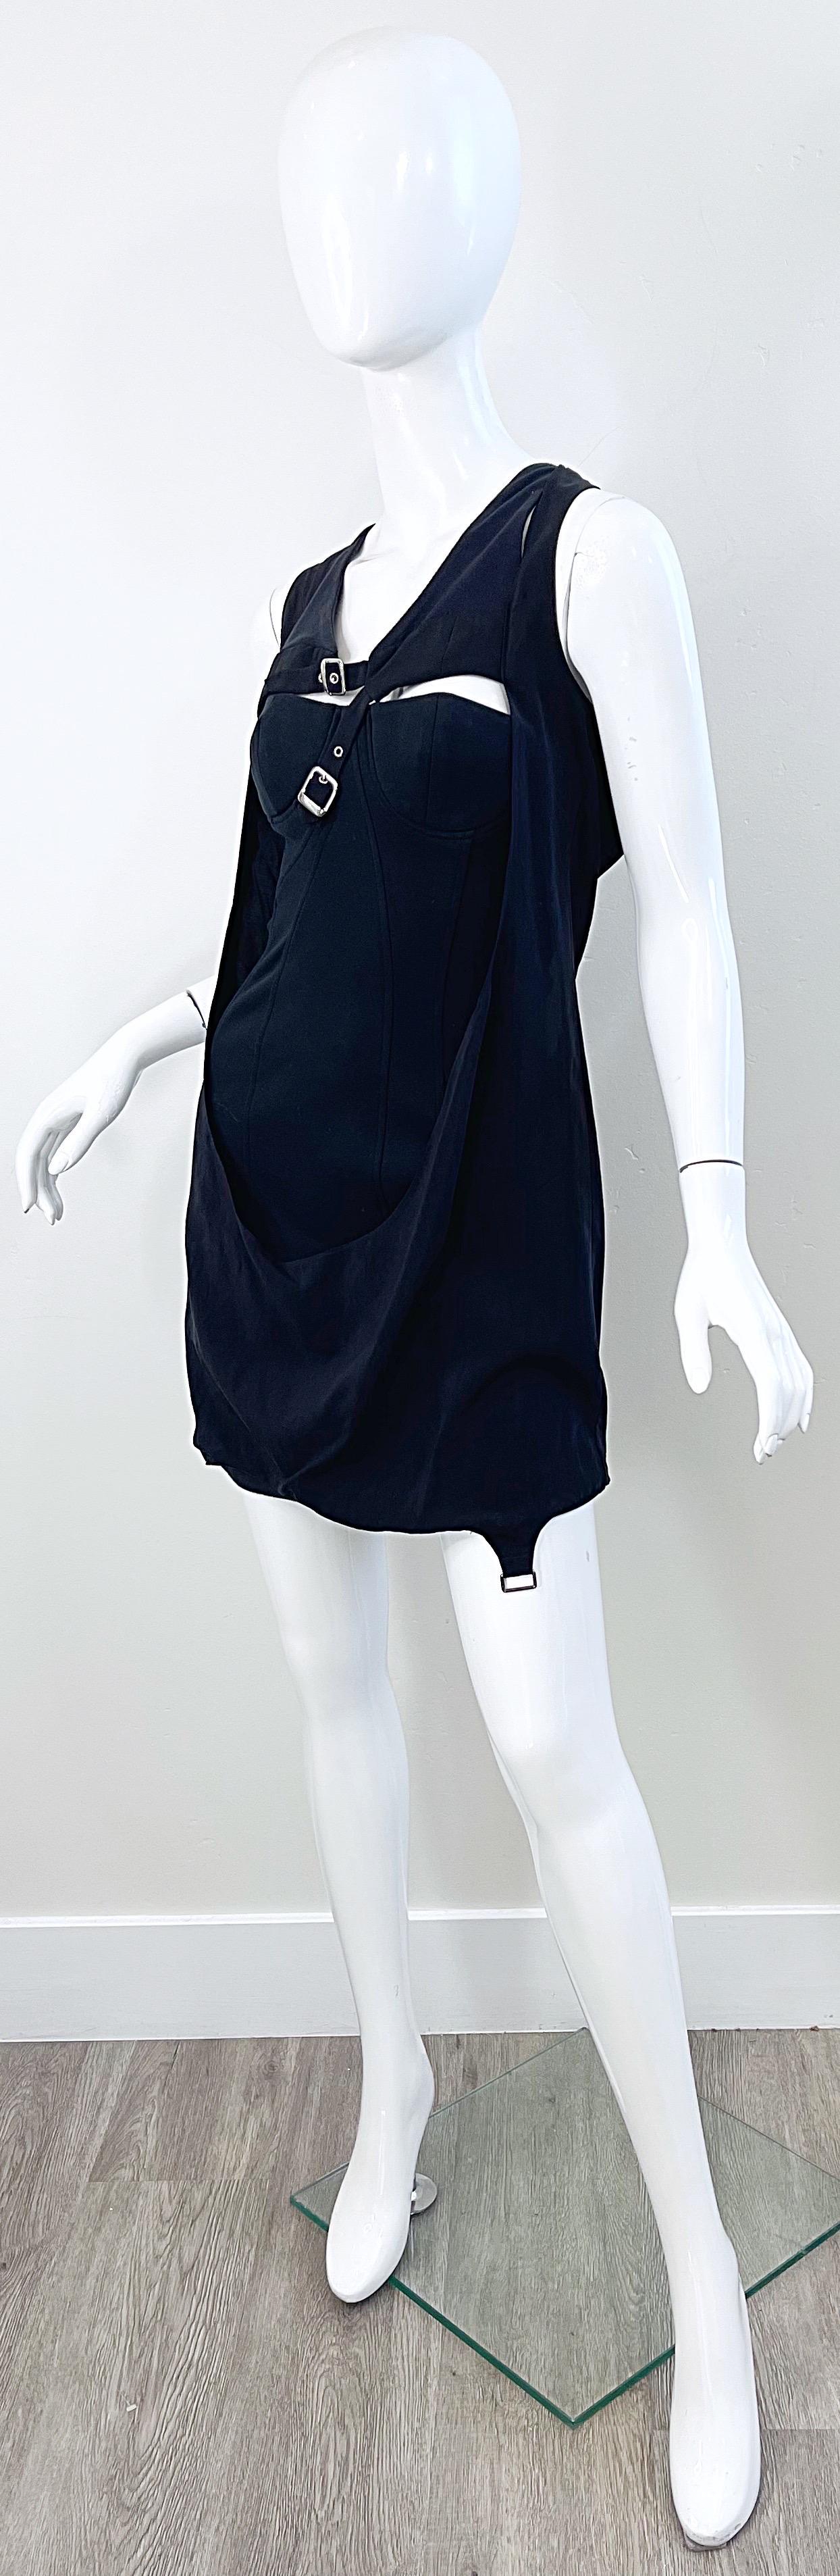 Hussein Chalayan Fall / Winter 2003 Runway Sz 4 Bondage Inspired Y2K Mini Dress In Excellent Condition For Sale In San Diego, CA